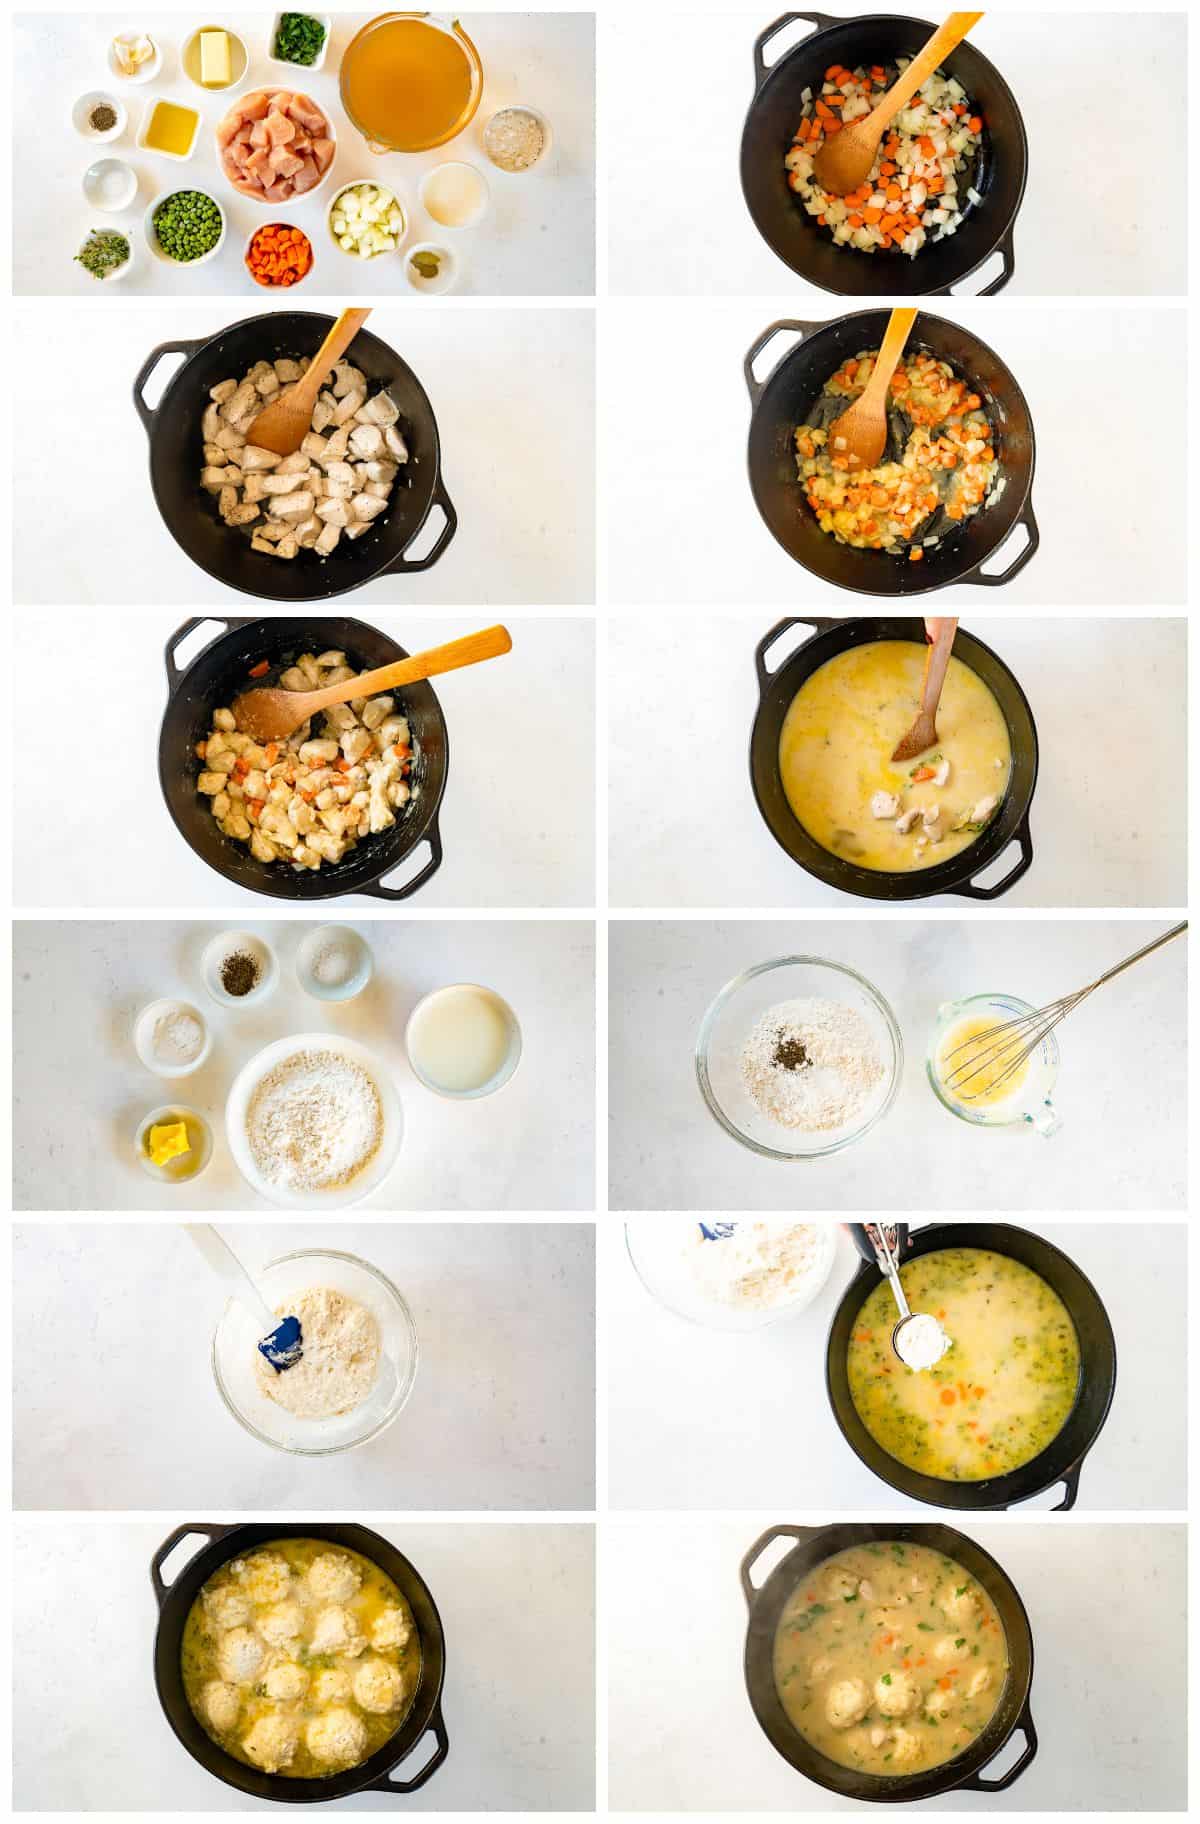 https://www.thecookierookie.com/wp-content/uploads/2021/11/step-by-step-photos-for-how-to-make-chicken-and-dumplings.jpg